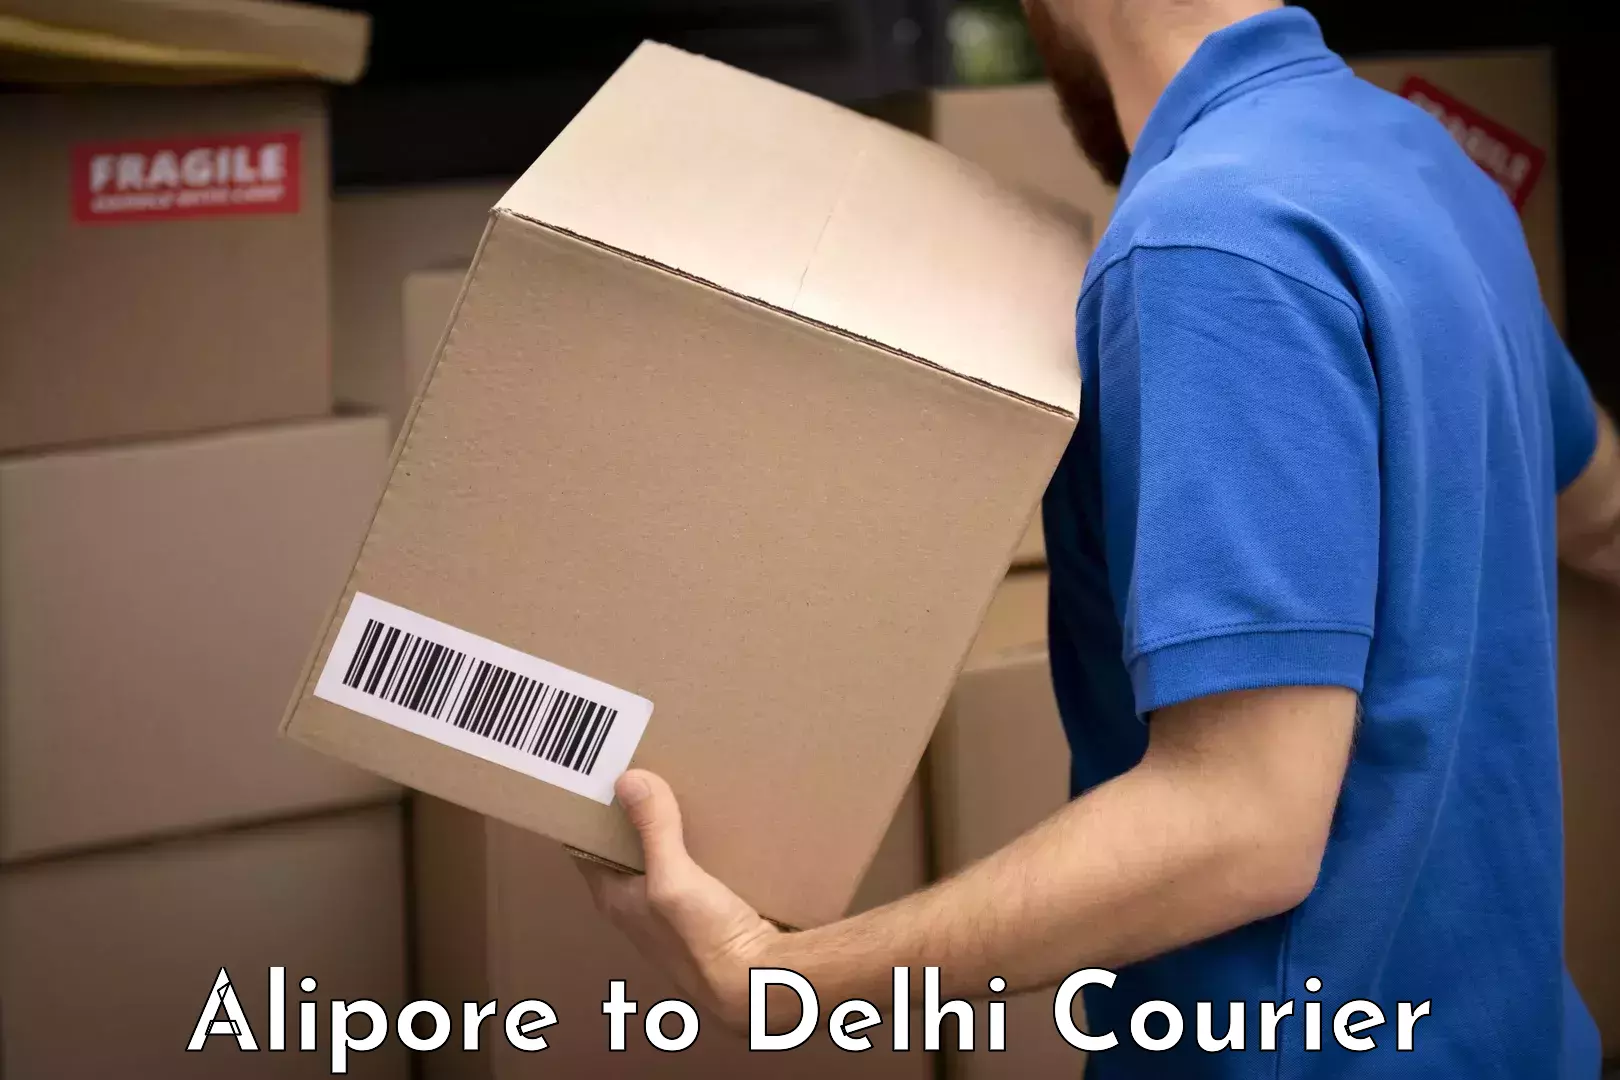 Baggage transport technology Alipore to NCR